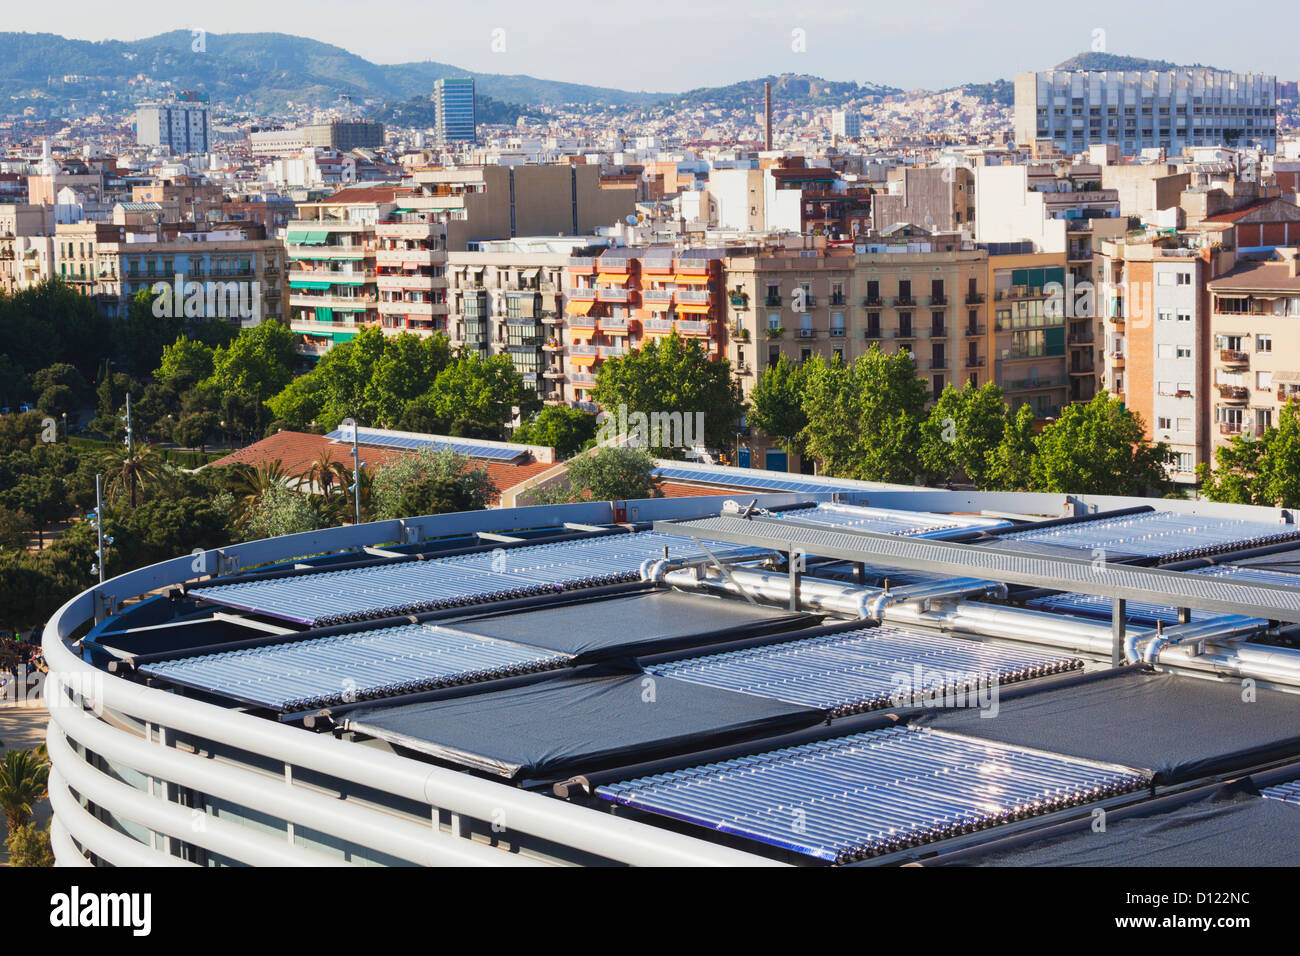 Solar Panels On The Roof Of A City Building Barcelona Spain Stock Photo Alamy